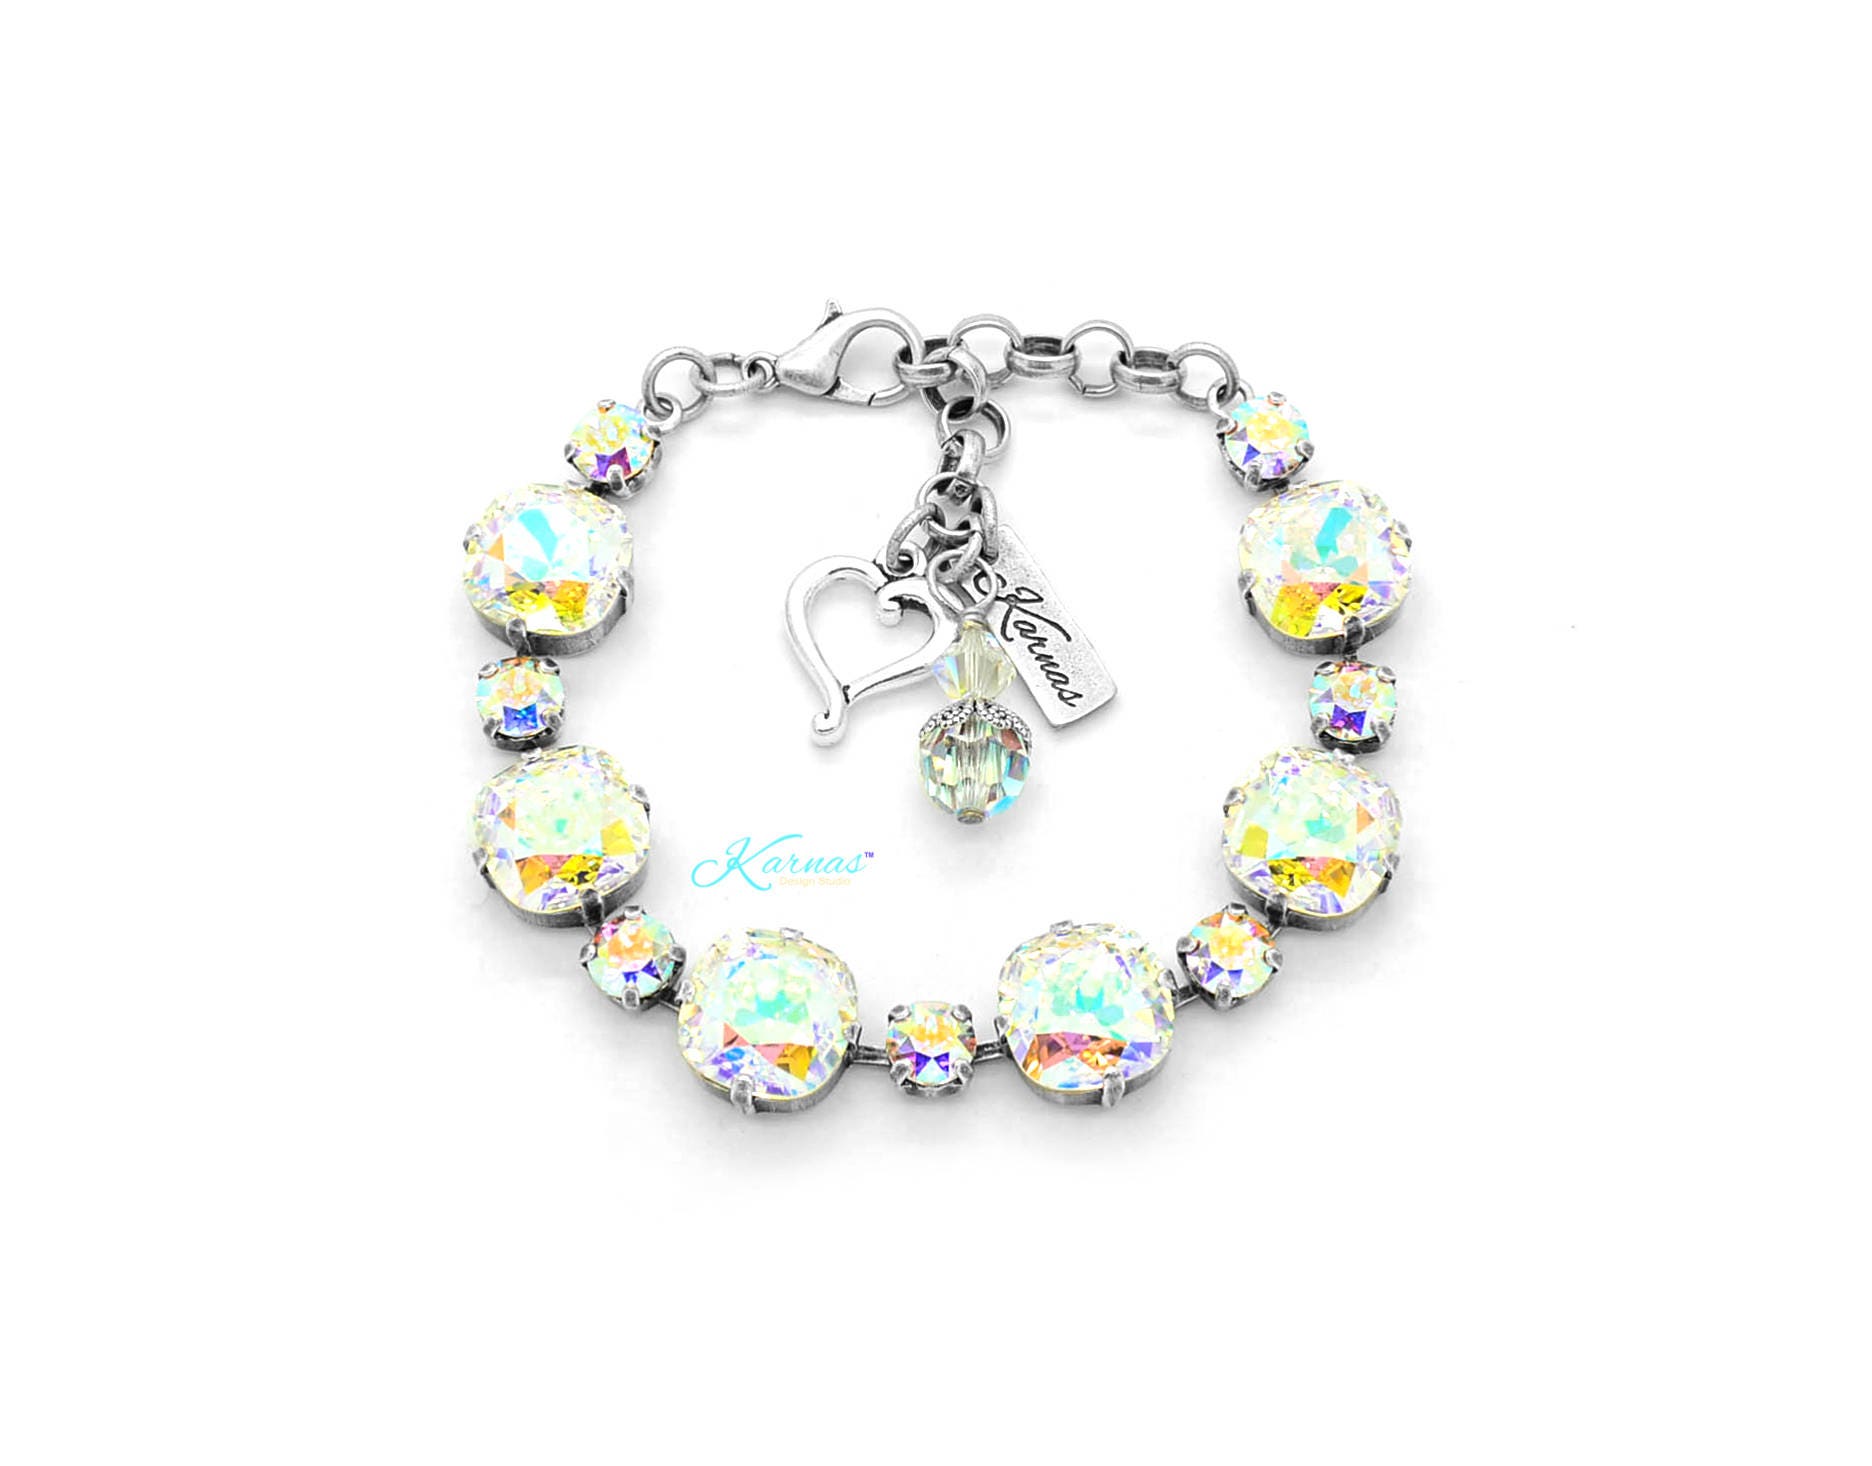 Follow Your Rainbow 6mm/12mm Cushion Cut Bracelet Made With K.d.s. Premium Crystal Choose Your Finish Karnas Design Studio Free Shipping